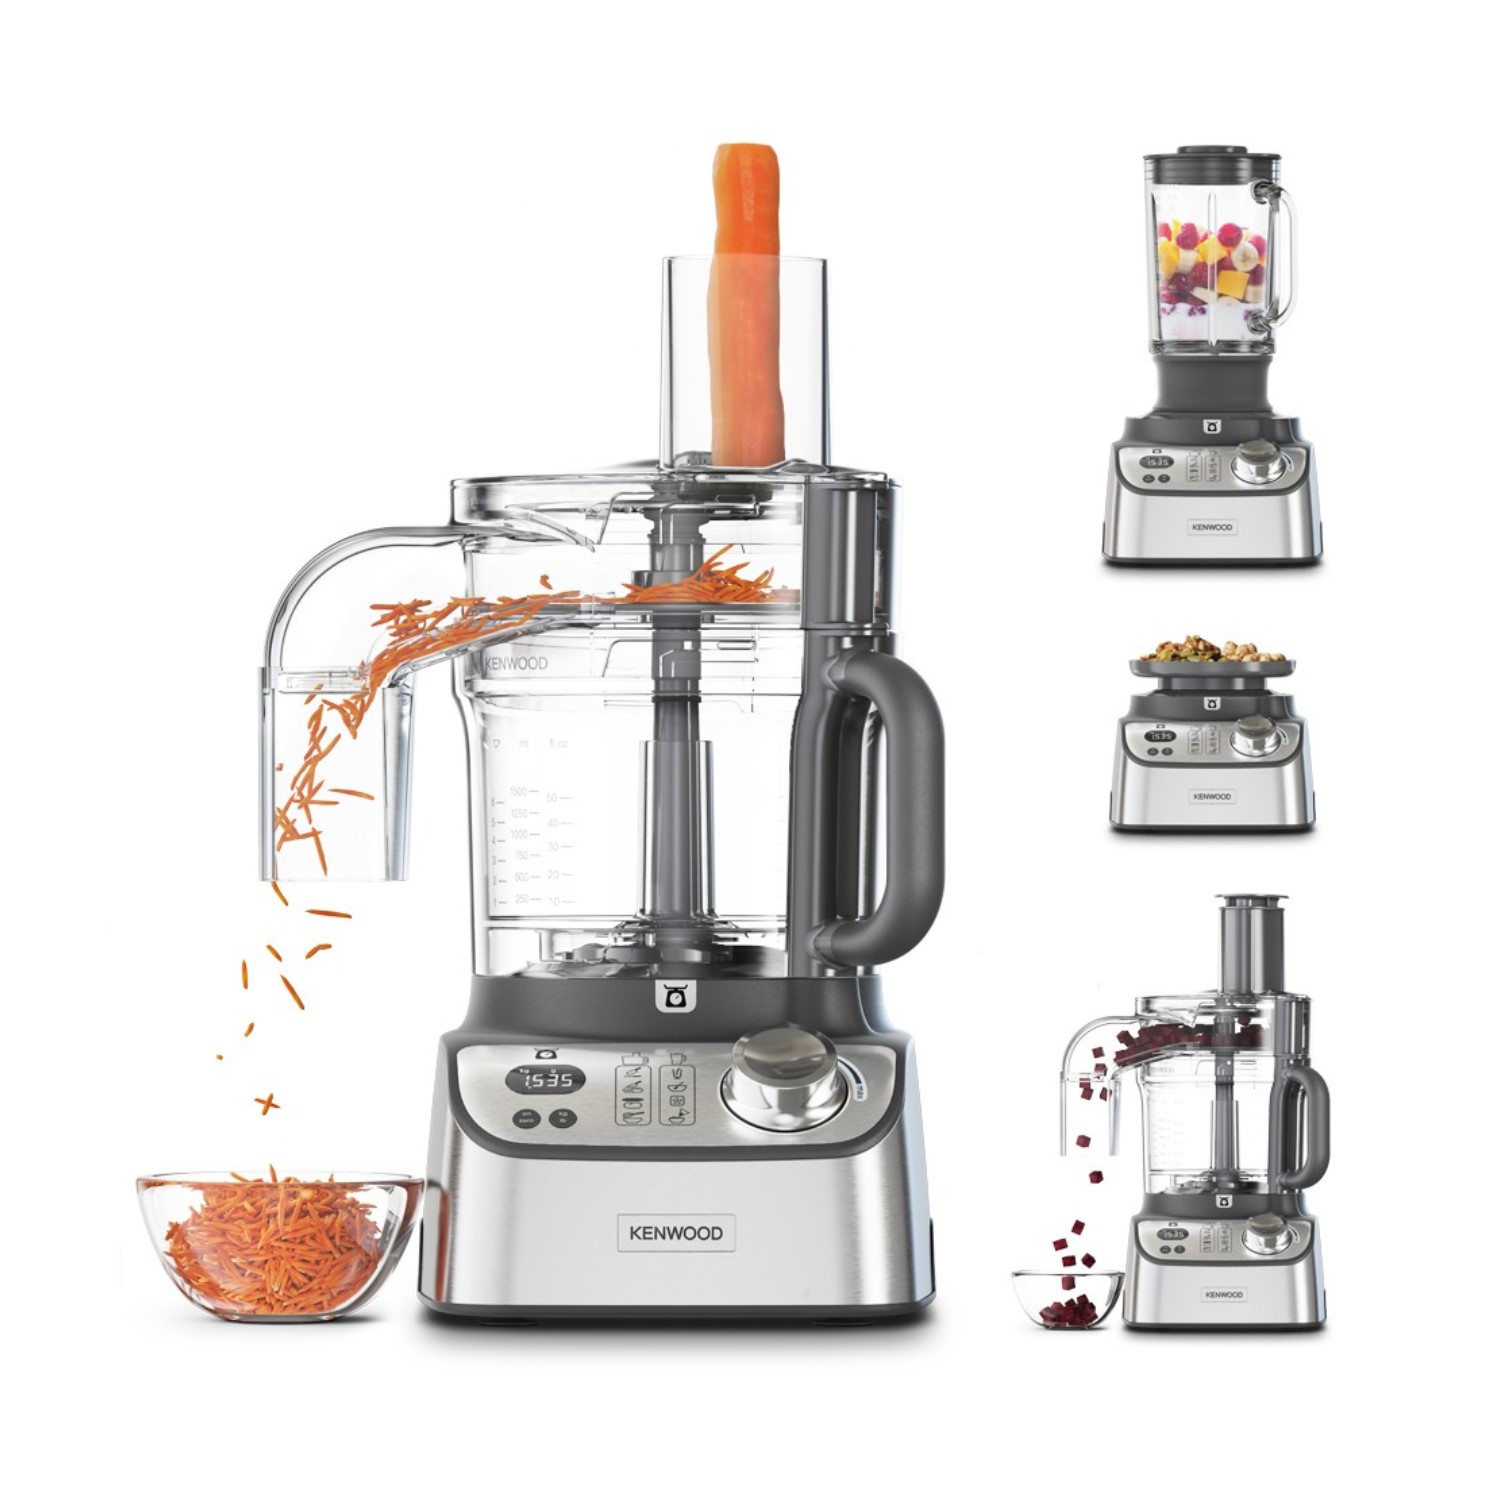 Kenwood Multipro Express Weigh+ 7-in-1 Food Processor with Blender and Built-In - Silver FDM71.960SS | Appliances Direct